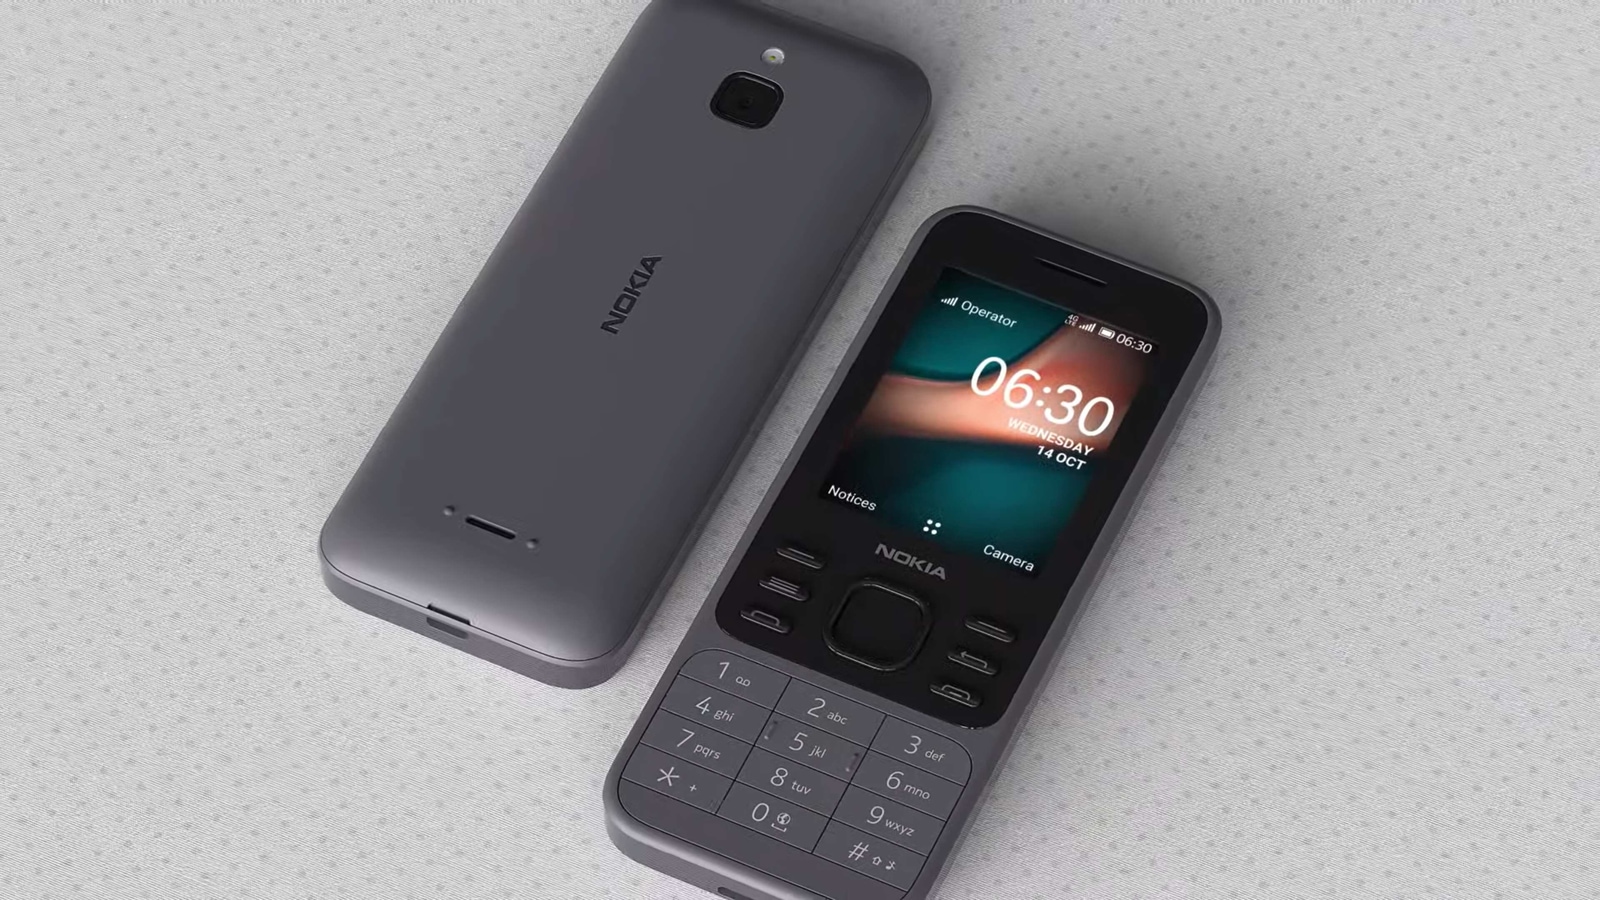 Nokia 6300, Nokia 8000 4G feature phones with WhatsApp, Google Assistant  launched